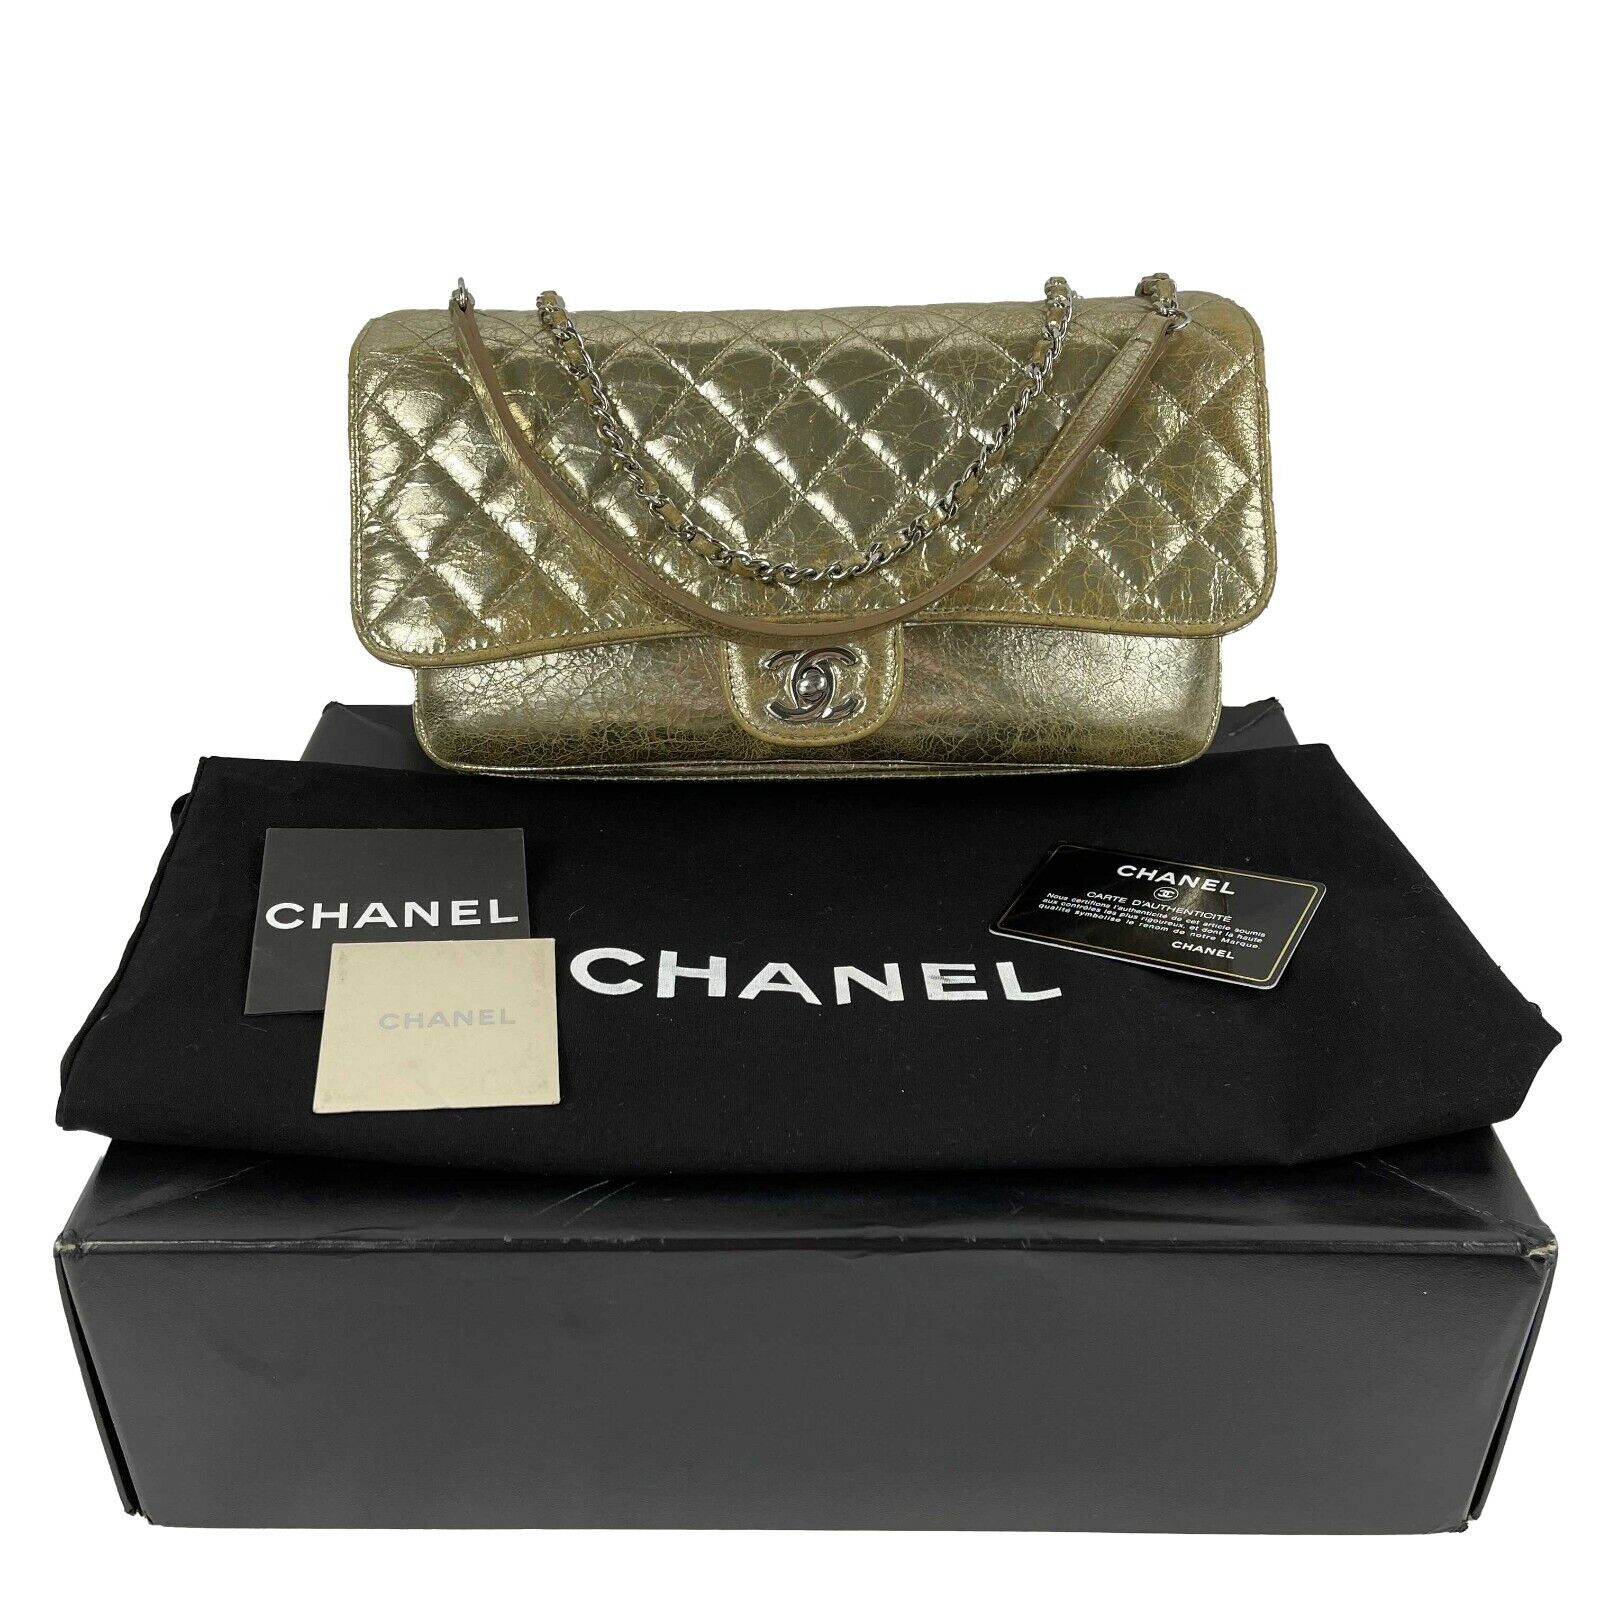 CHANEL Quilted Distressed Glazed Gold Leather Accordion Flap Shoulder